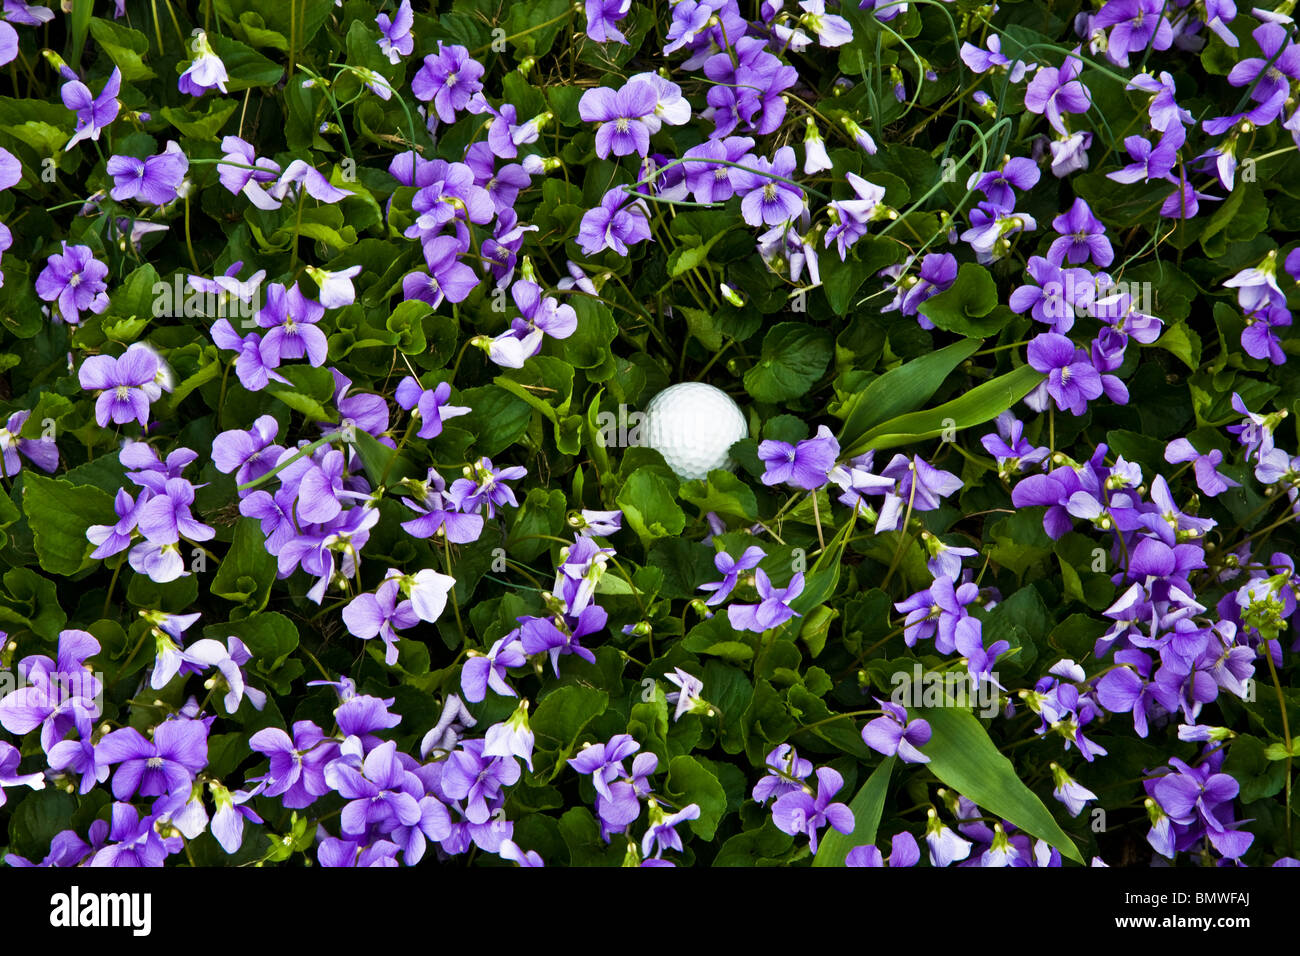 Humorous close up of a golf ball out of bounds or in the rough among common blue wild violets, Viola Sororia, in New Jersey, USA, US, North America Stock Photo